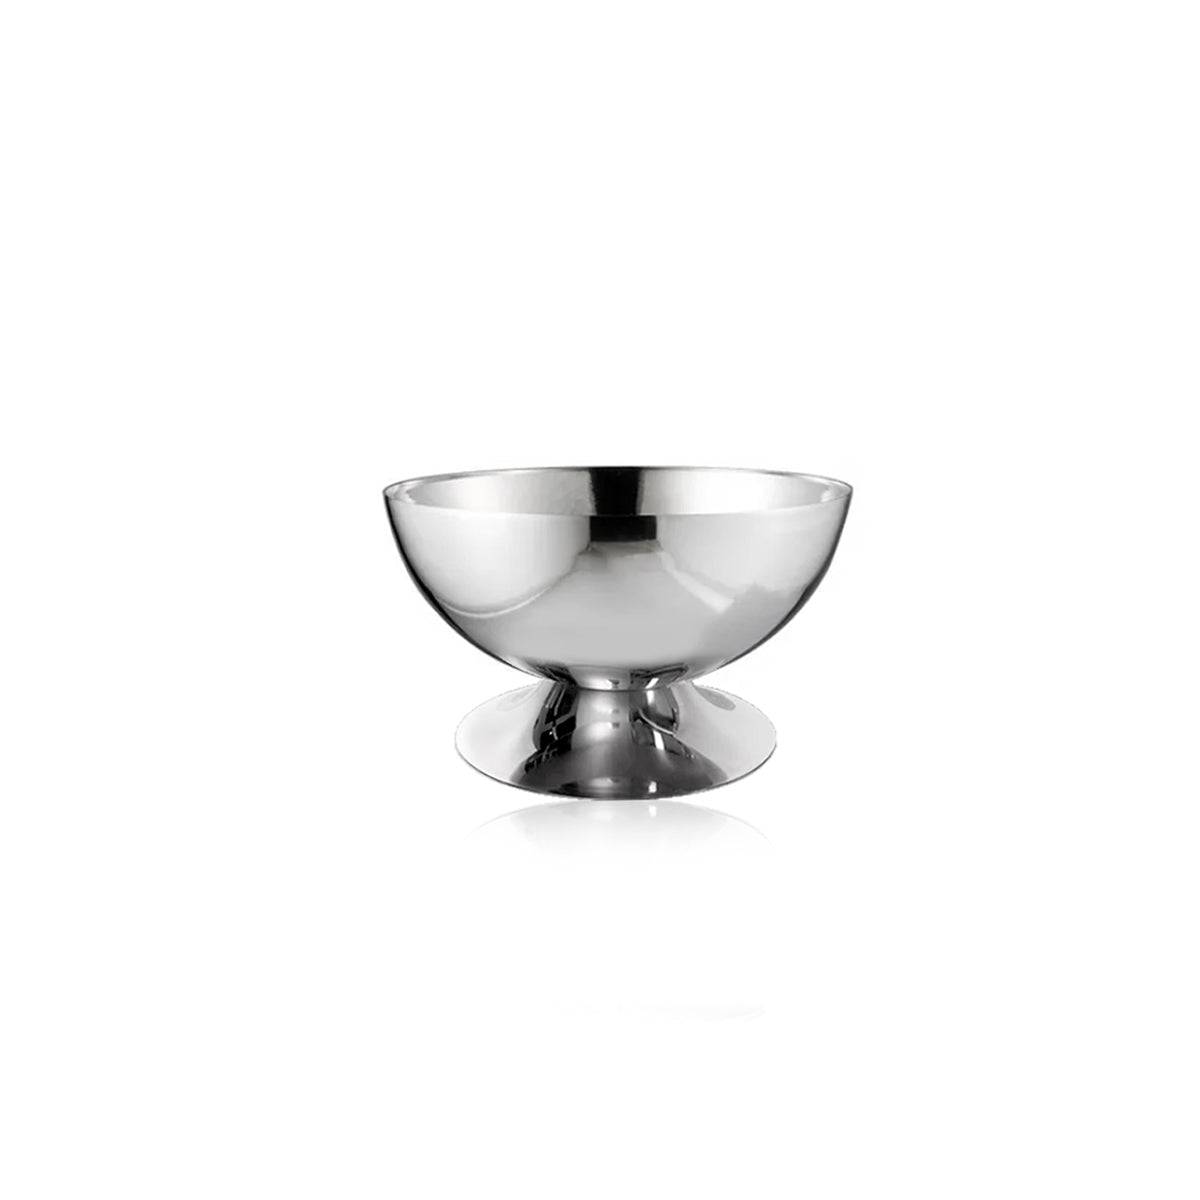 Stainless Steel Bowl For Ice cream & Salad